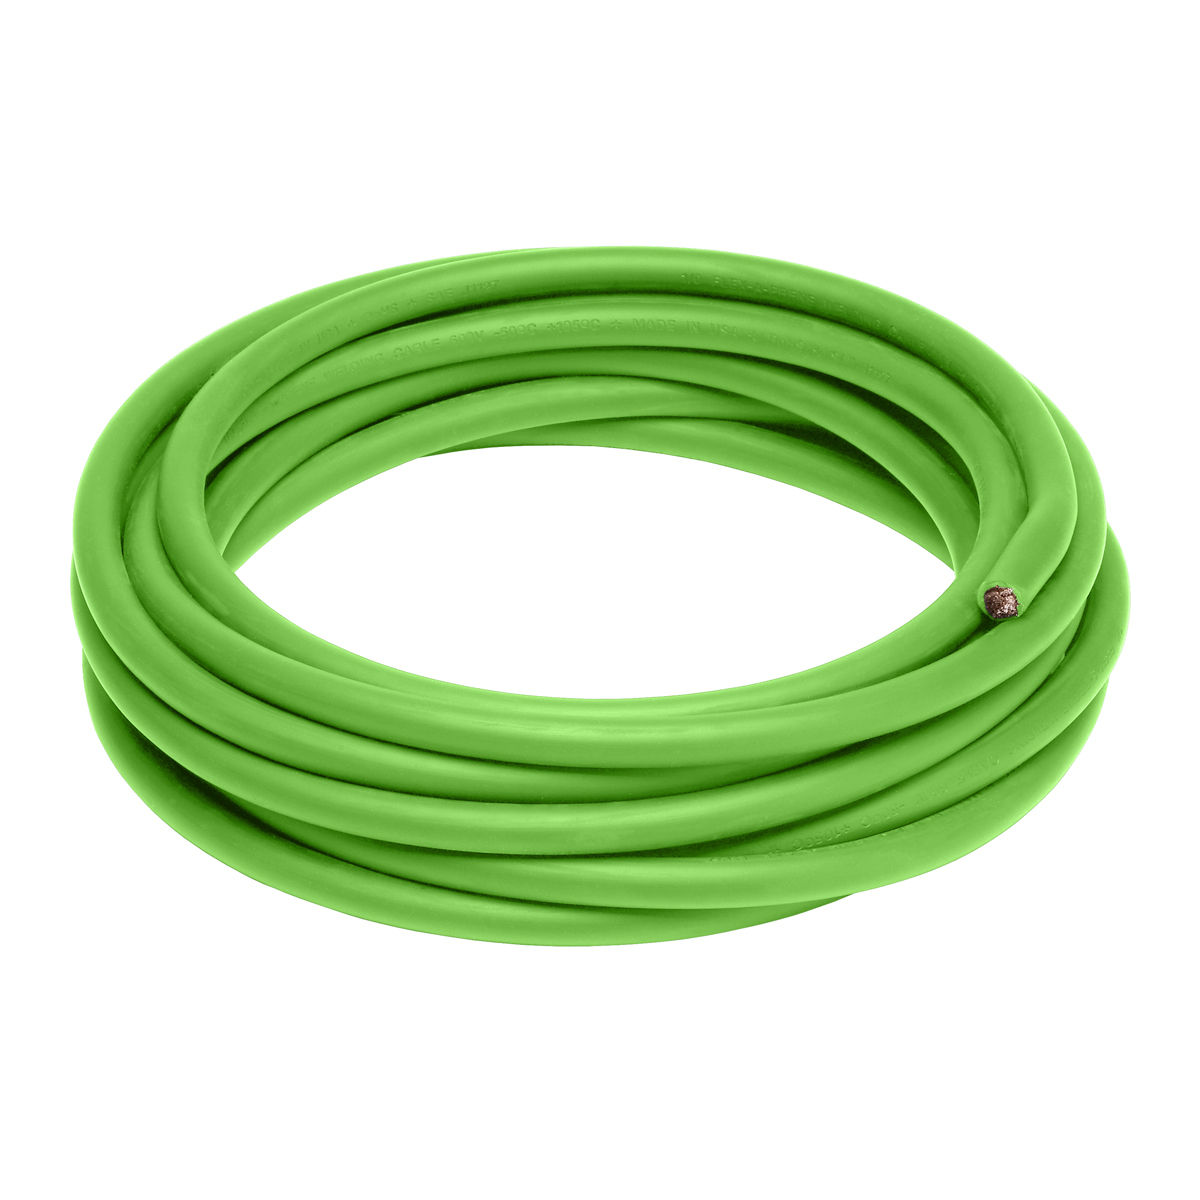 5' FT 1/0 AWG WELDING/BATTERY CABLE GREEN 600V MADE IN USA COPPER EPDM JACKET 